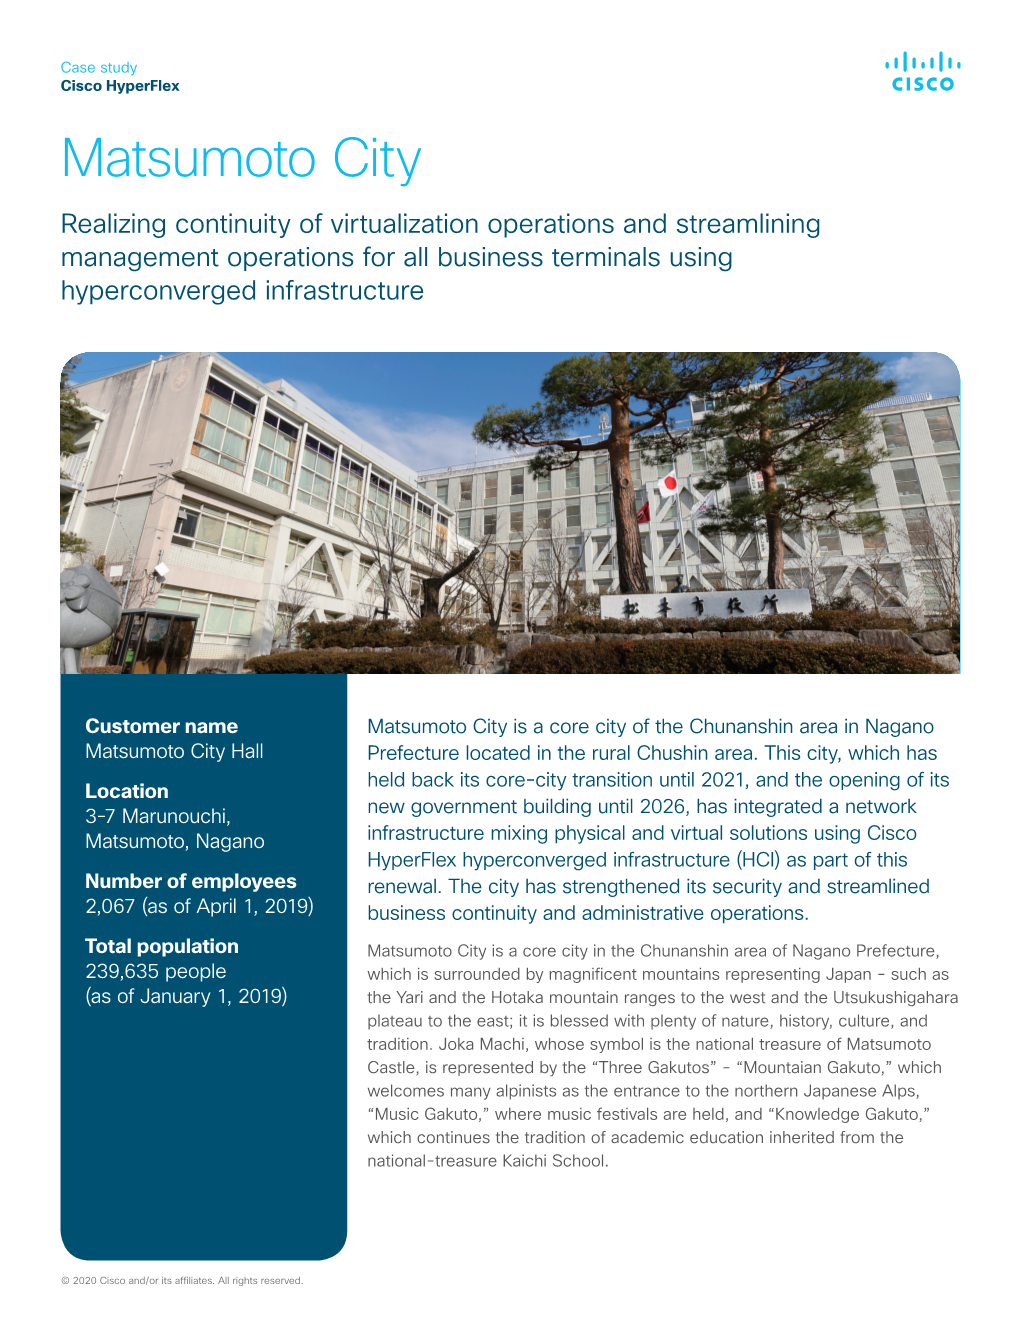 Matsumoto City Realizing Continuity of Virtualization Operations and Streamlining Management Operations for All Business Terminals Using Hyperconverged Infrastructure